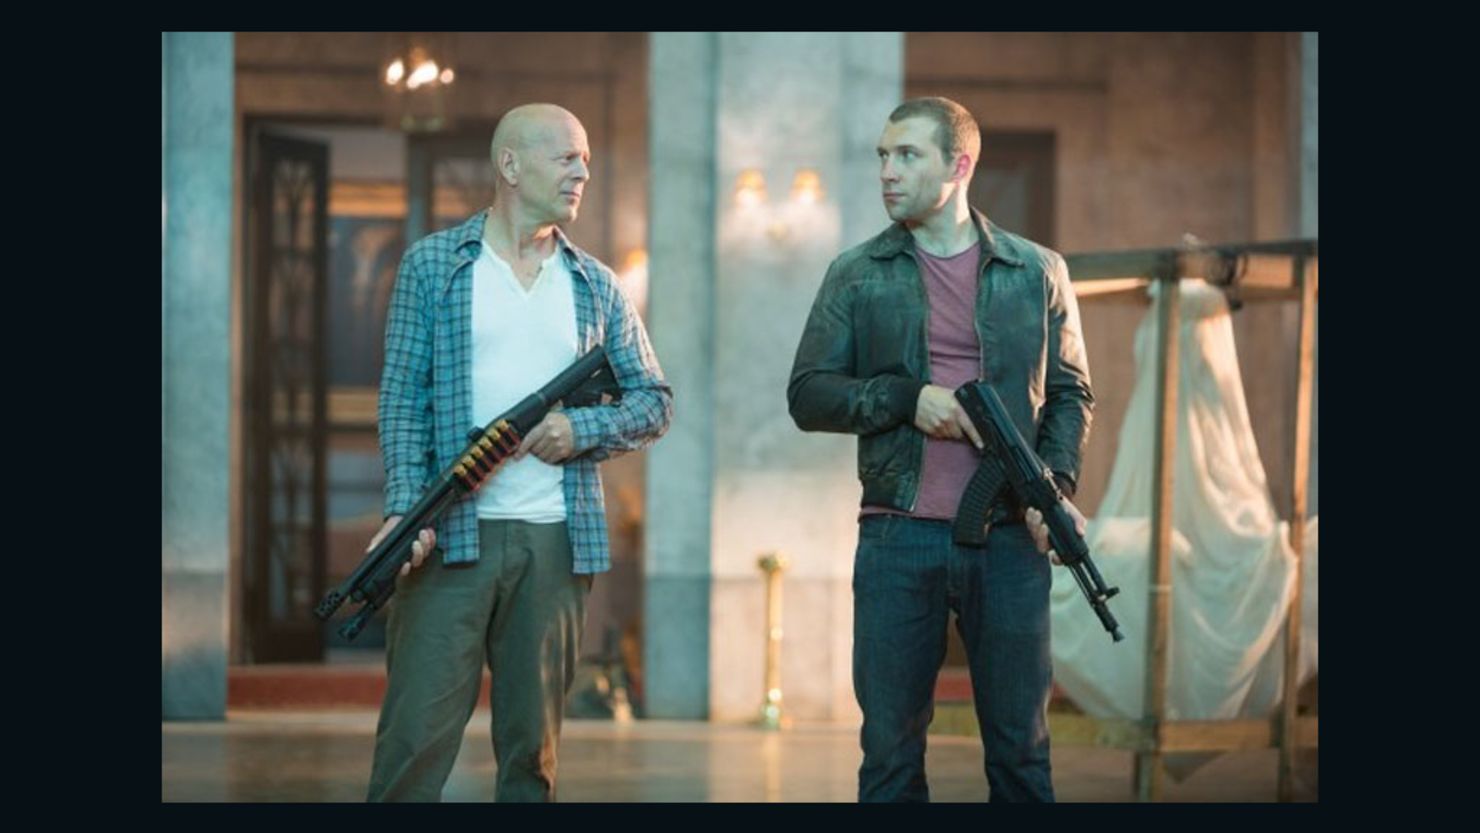 Bruce Willis stars as John McClane and Jai Courtney stars as Jack McClane in "A Good Day to Die Hard."
